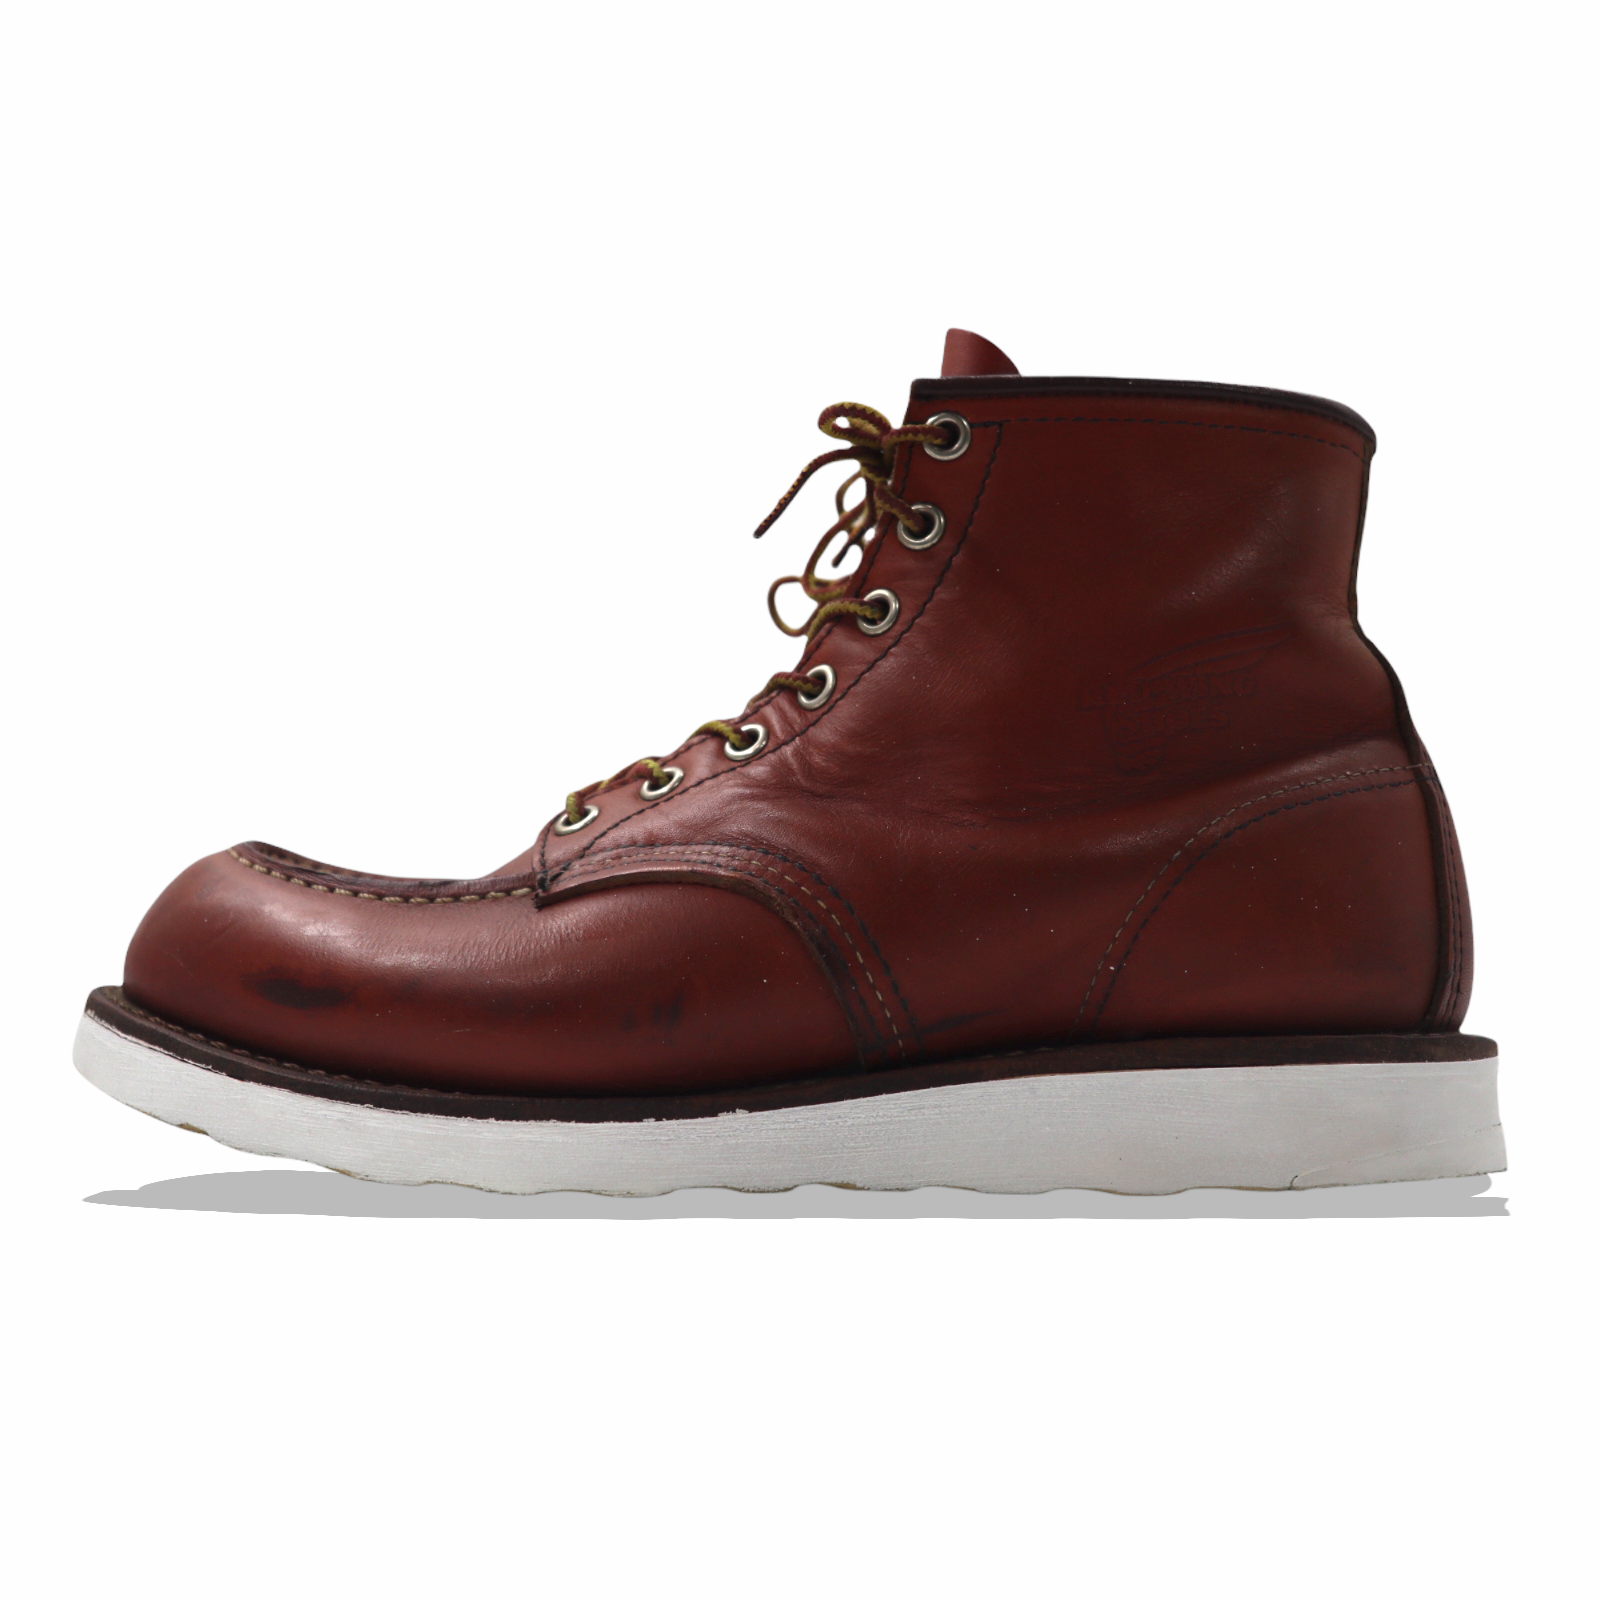 RED WING 8875【26.0㎝】 - ブーツ